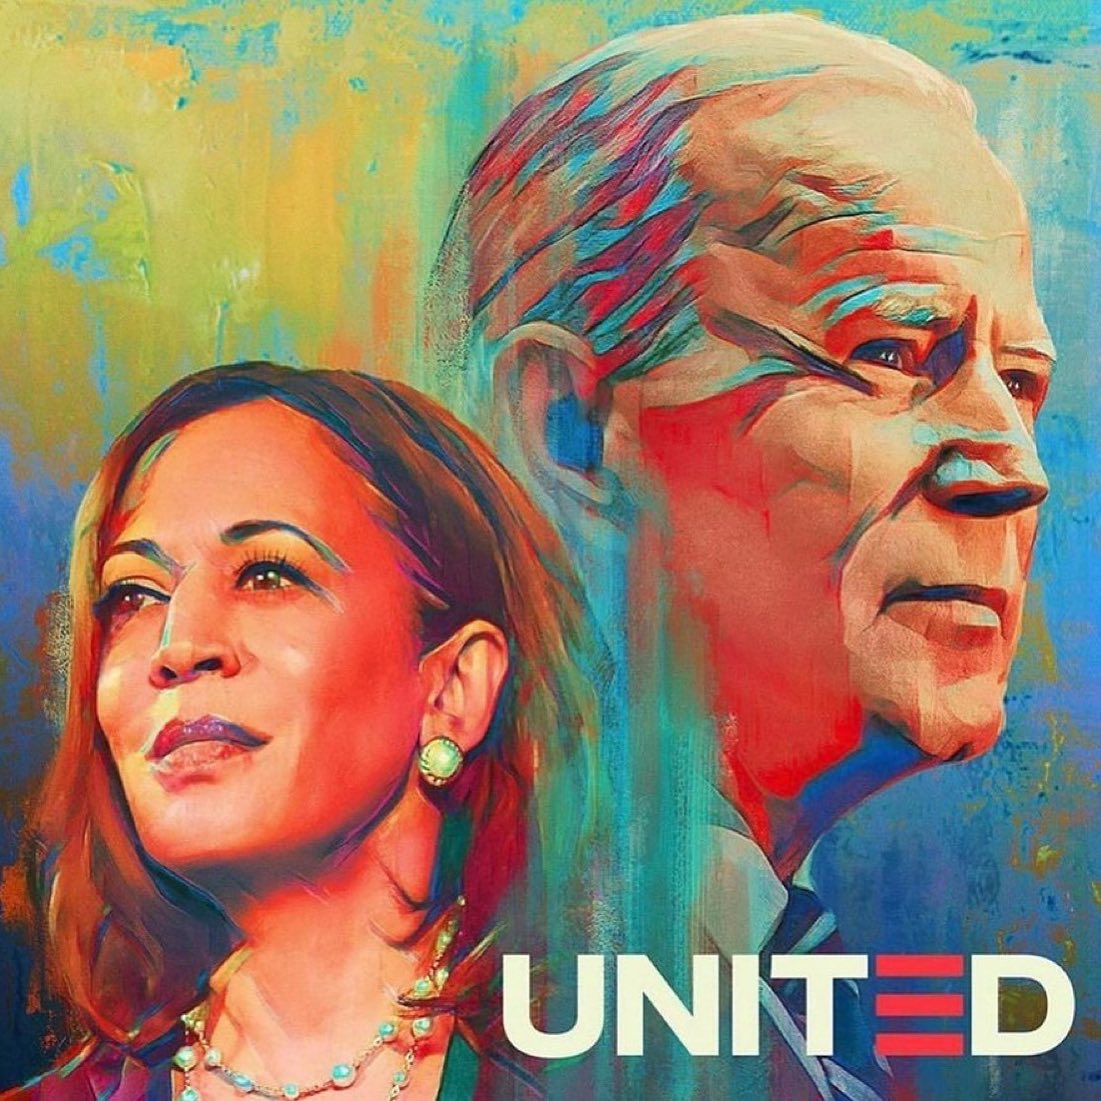 Words can barely express how I feel. @joebiden becoming President signals a return to ethics, morality, science, equality, civic duty, true democracy, and policies to benefit the people. He’s worked 48 years to get here. @KamalaHarris becoming the first female, first South Asian, first Black VP, and a child of immigrants, is so personally gratifying. This is America, people!